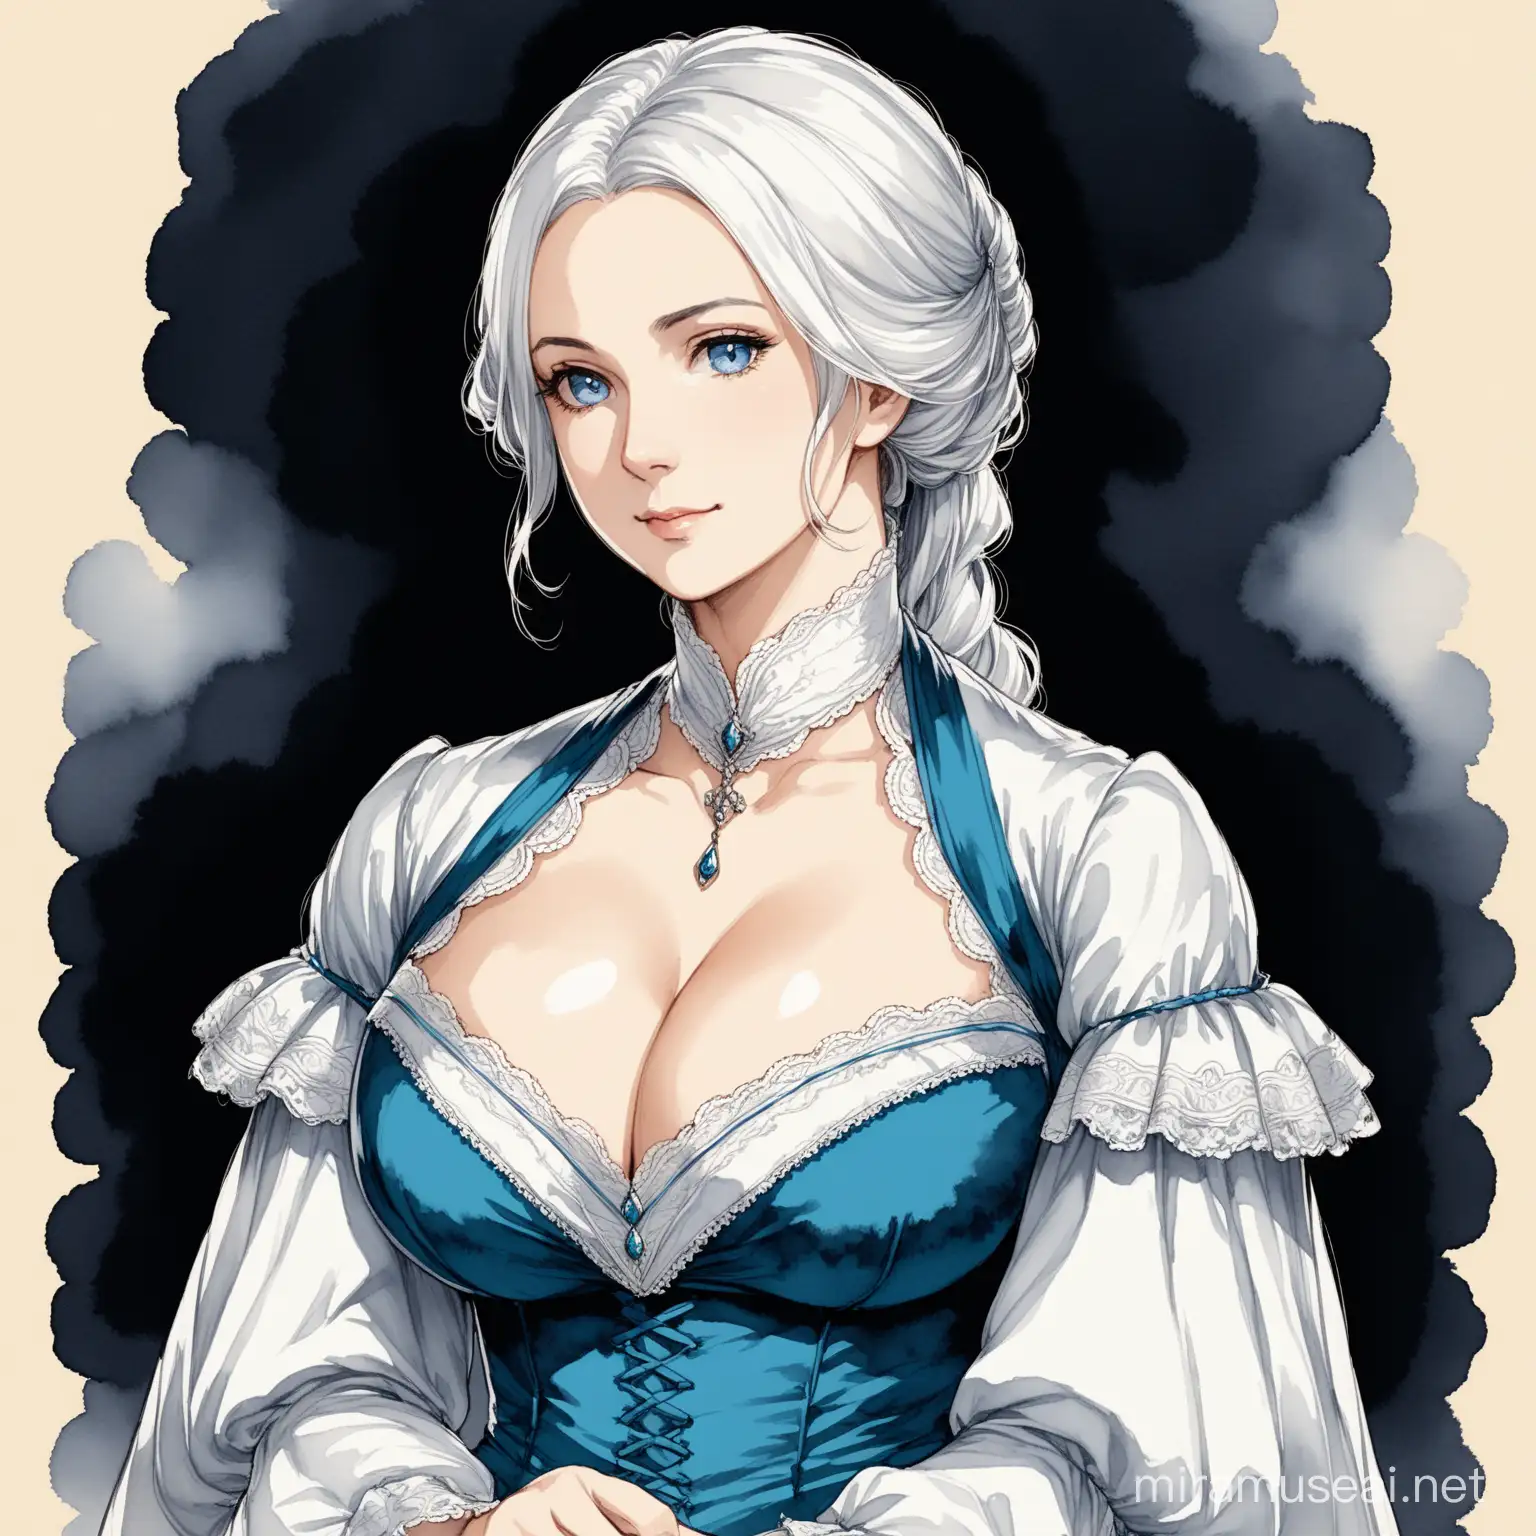 Elegant Victorian Woman with White Hair and Blue Eyes in Ink Painting Style